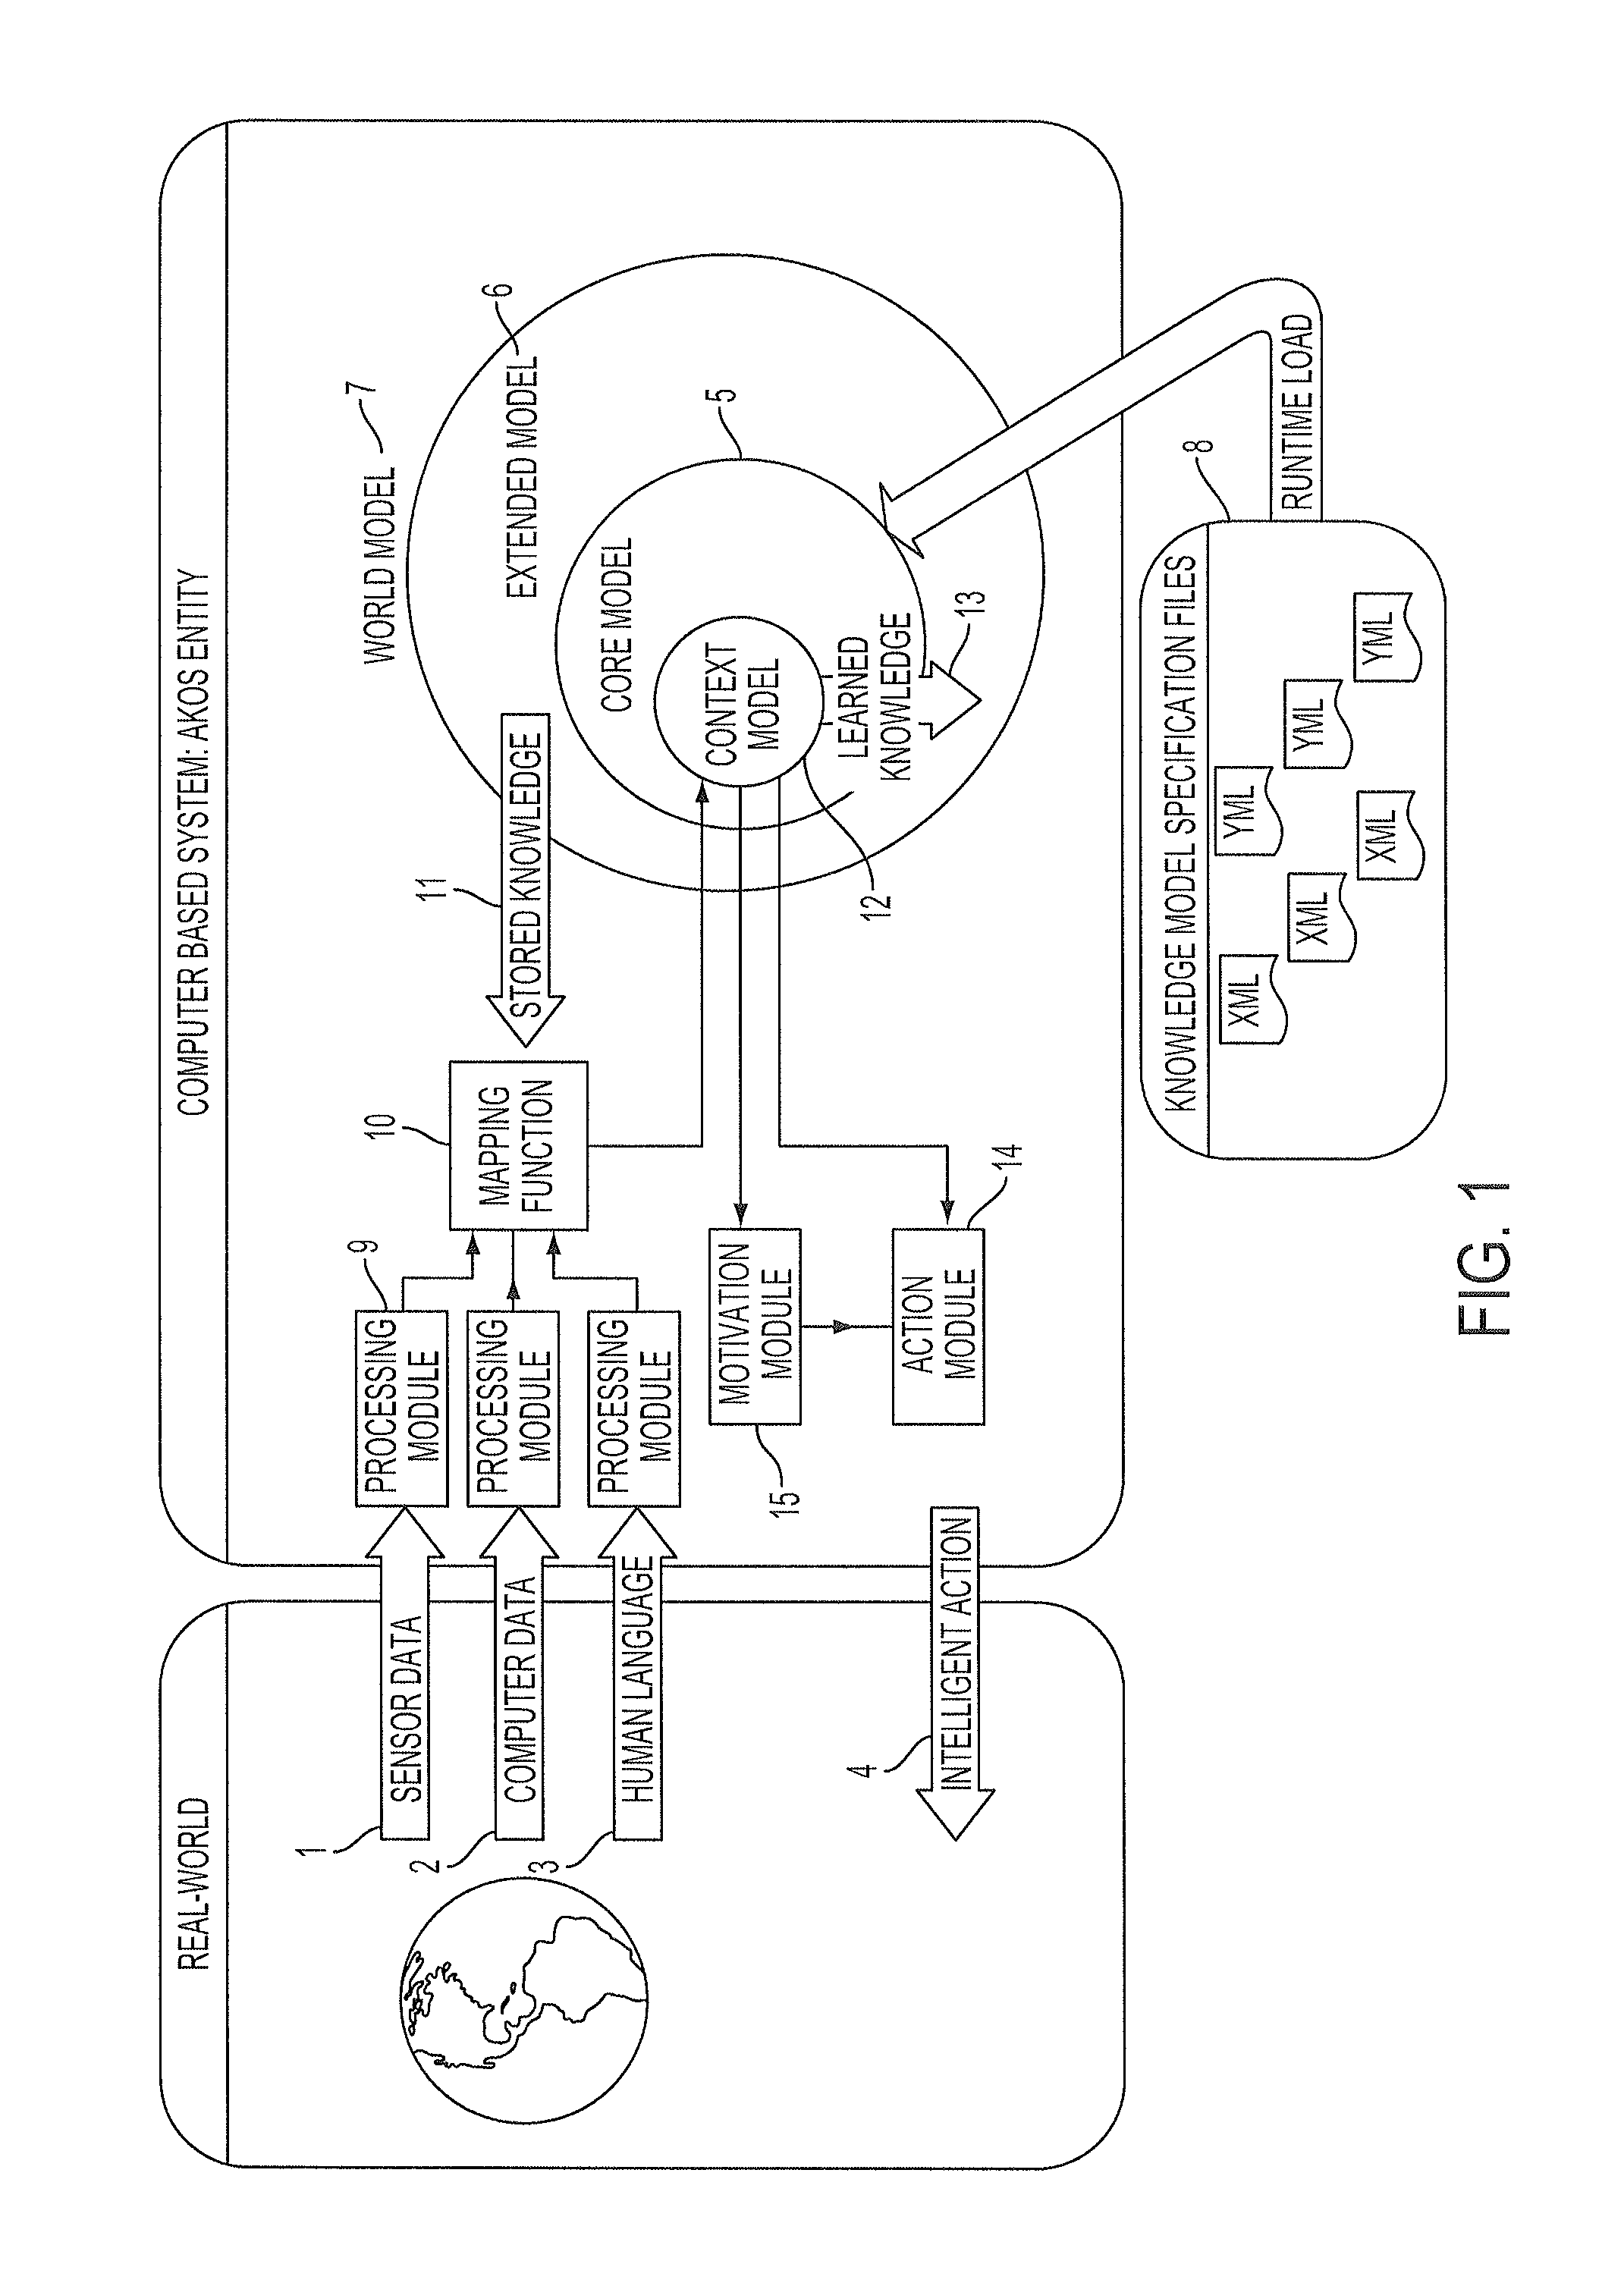 Method and system for machine comprehension